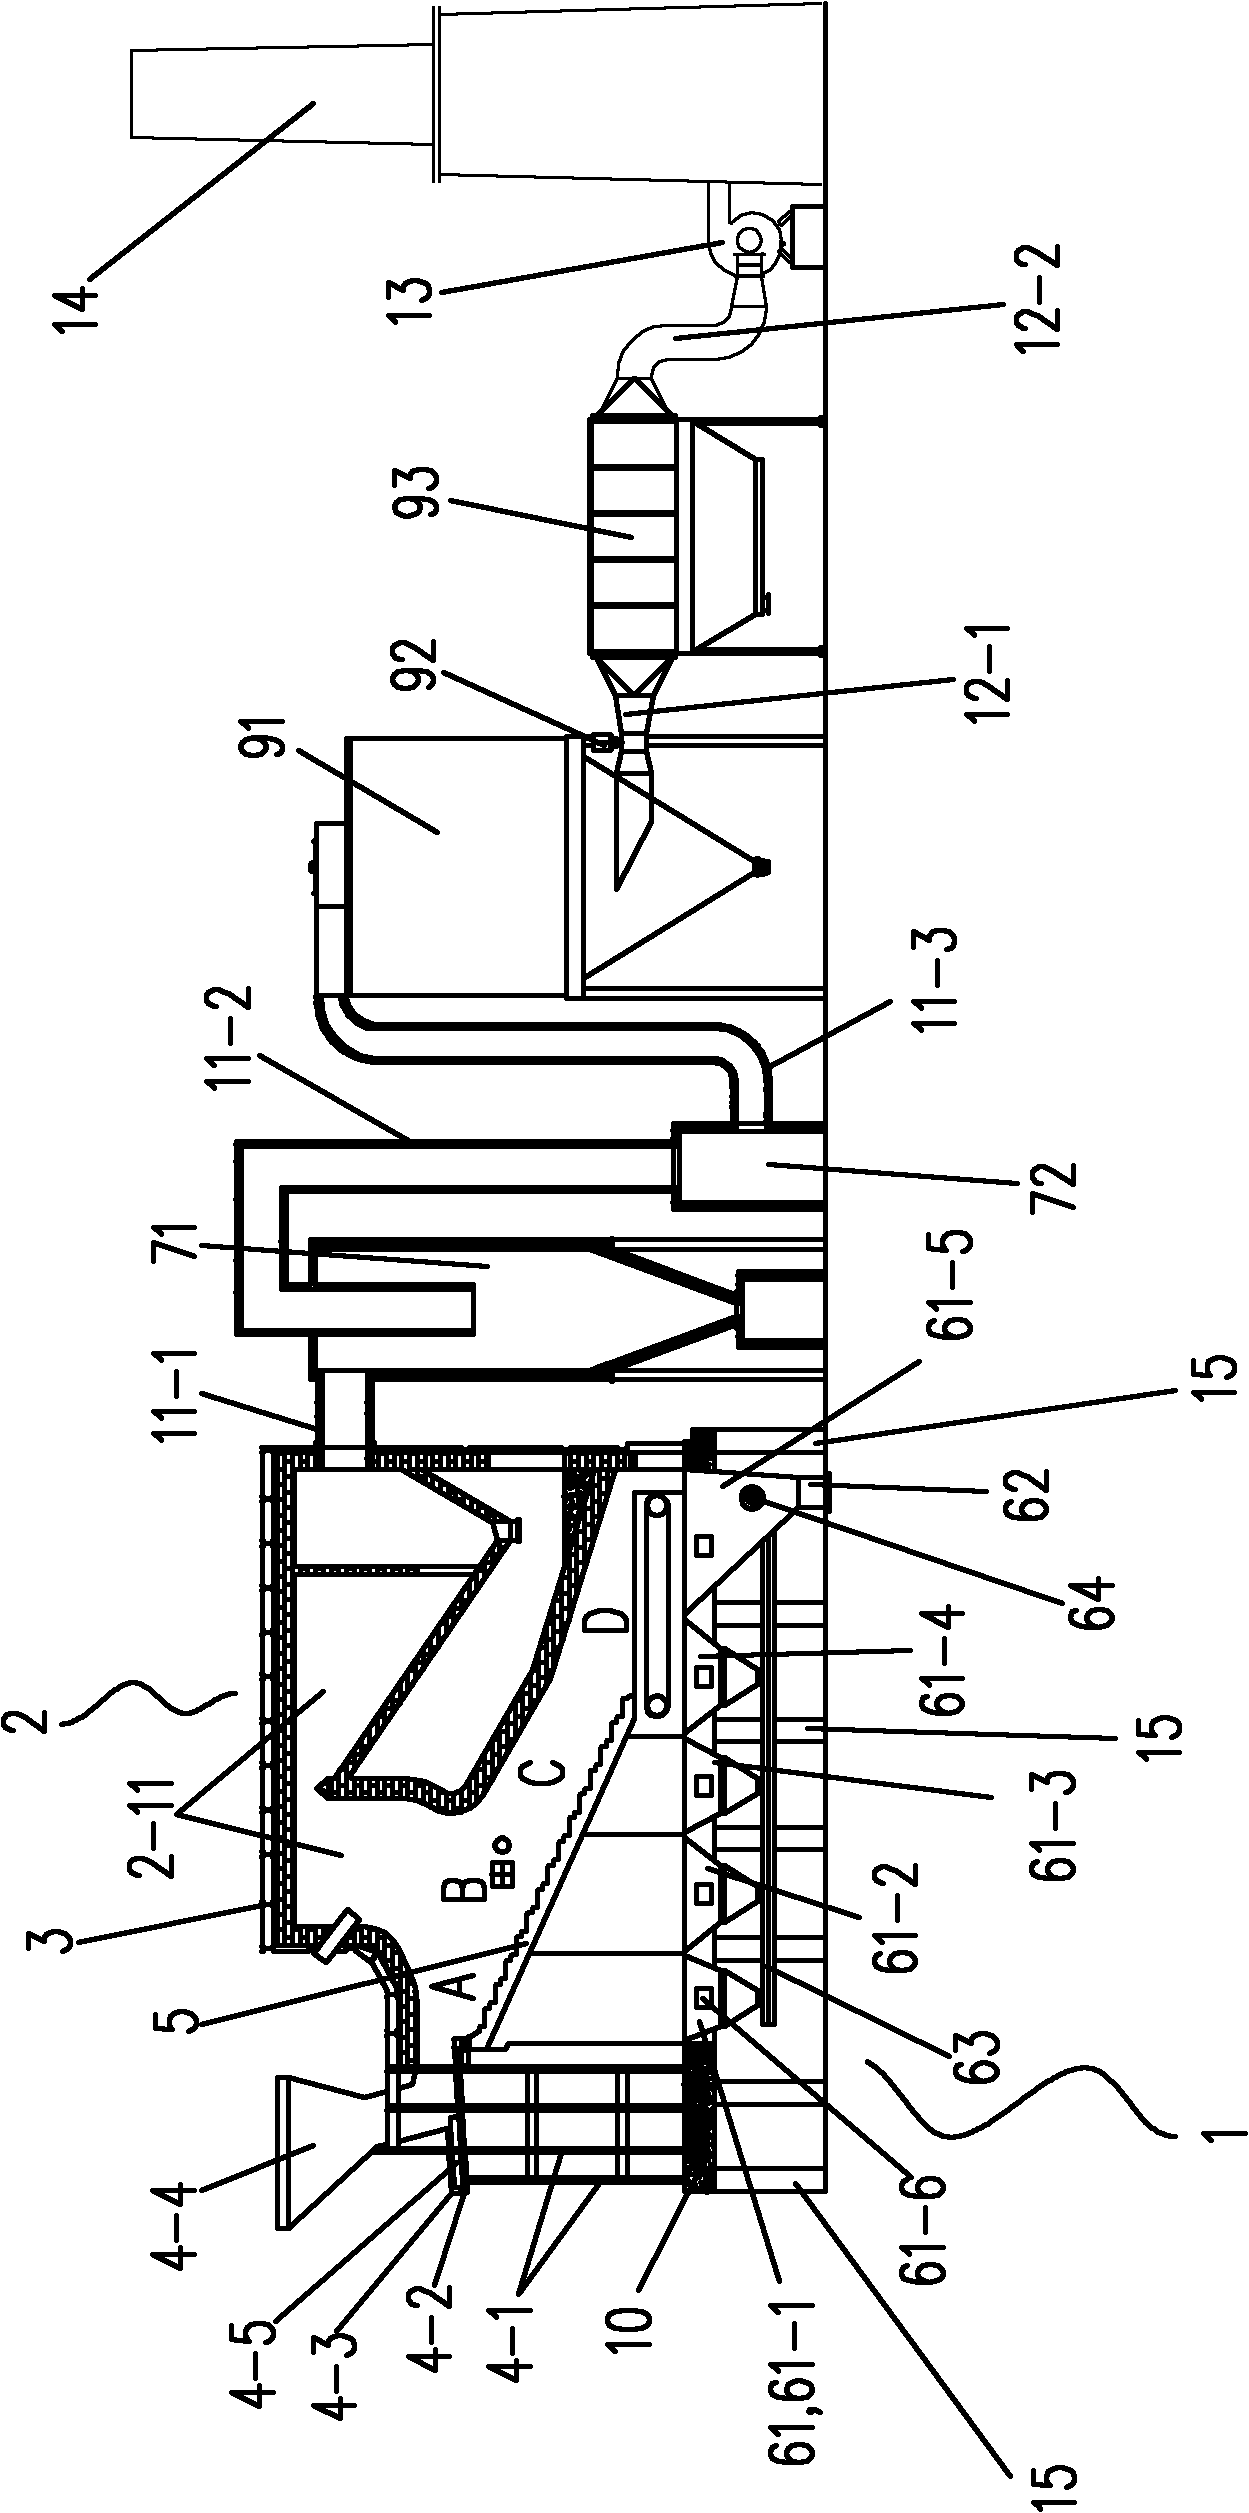 Household garbage incineration and flue gas processing system and method for processing household garbage